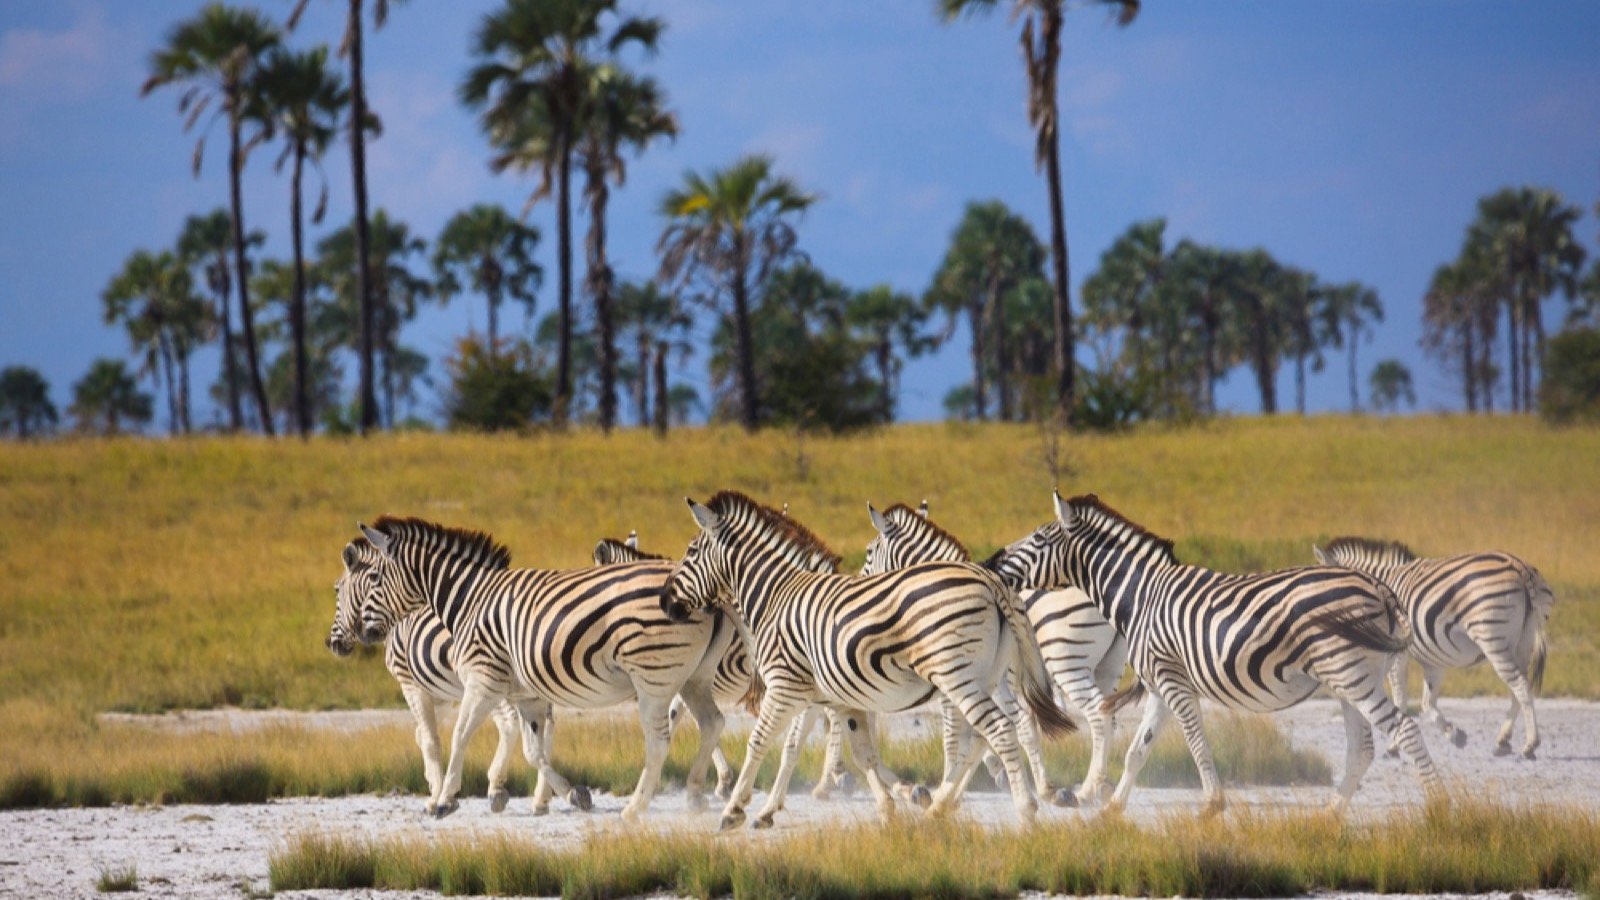 <p>Between March and April, you can observe about 30,000 zebras migrating across the saltpans of Botswana. Their arduous journey takes around six months, and they spend a few months enjoying the lush grazing and plentiful water supply at the Boteti River.</p><p>What appeals to visitors is that the zebra migration isn’t as popular as the wildebeest migration, so the experience feels more intimate.</p>